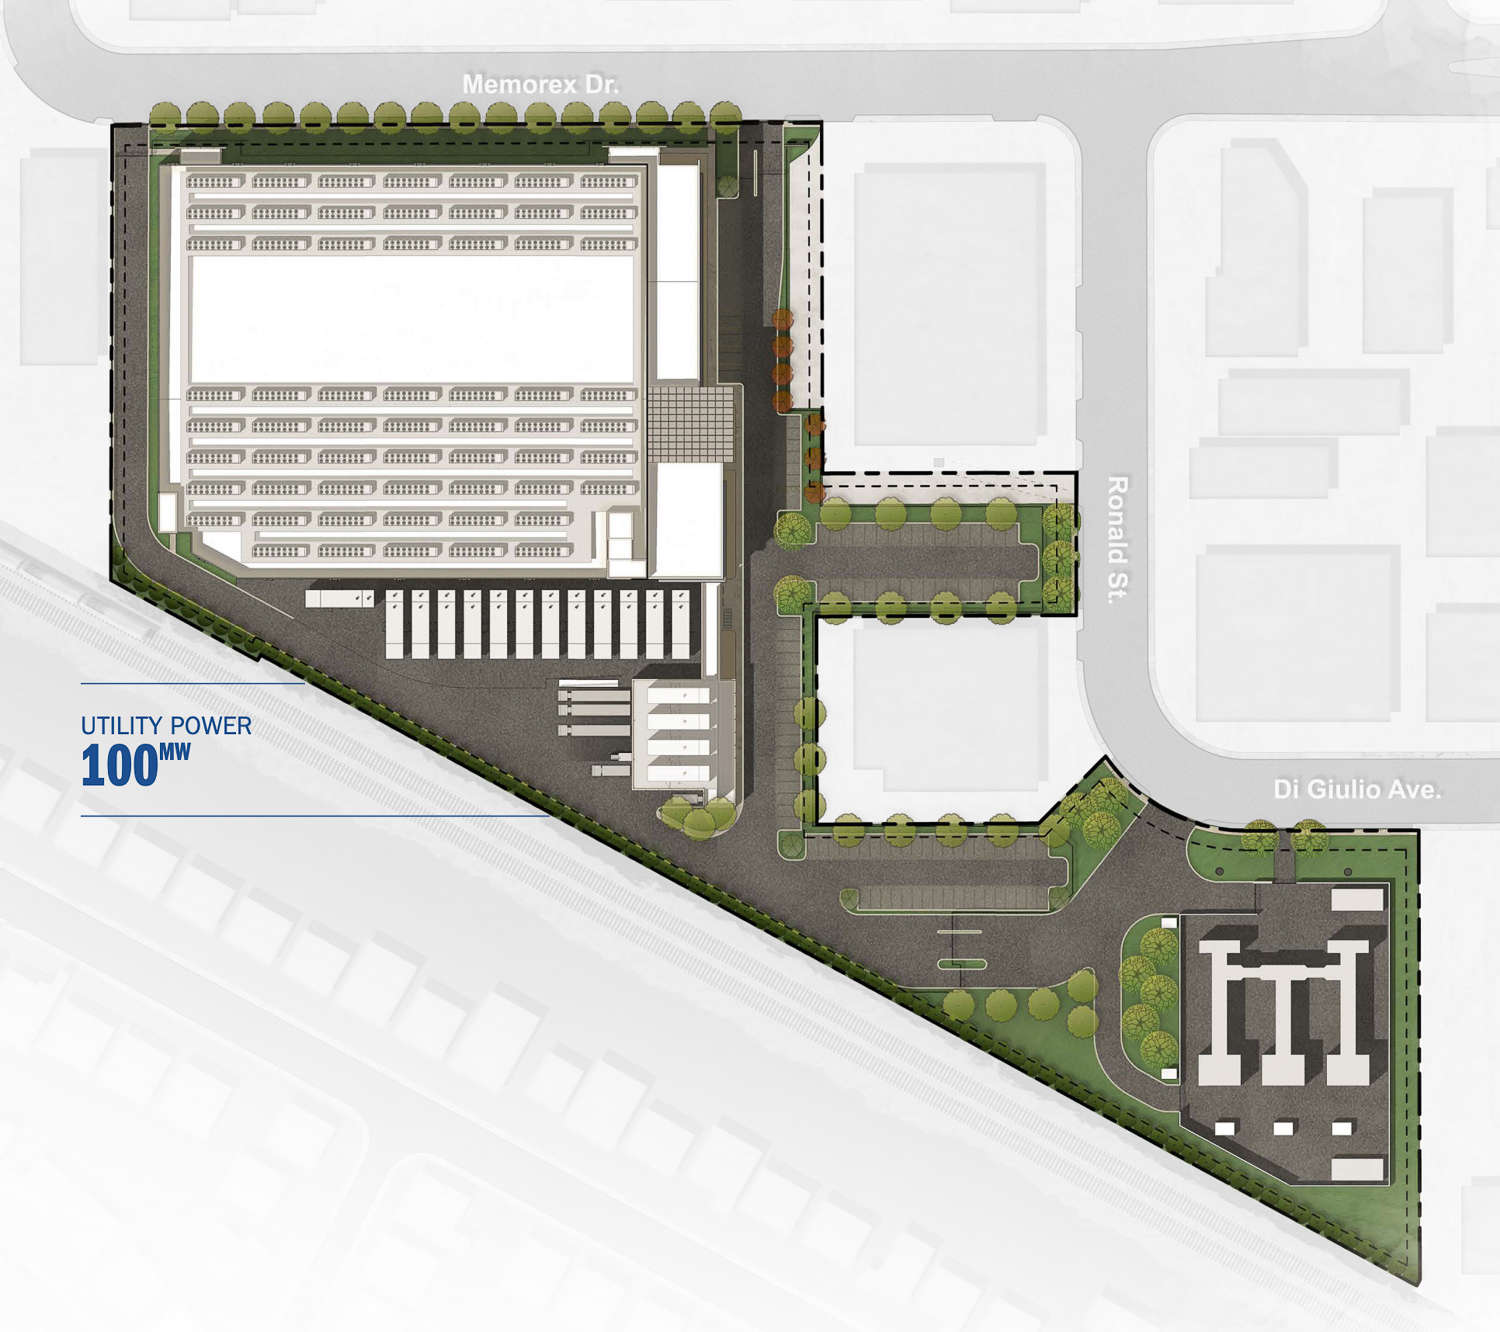 1200 Memorex Drive SVY03 Data Center birds eye view, illustration published by Stack Infrastructure